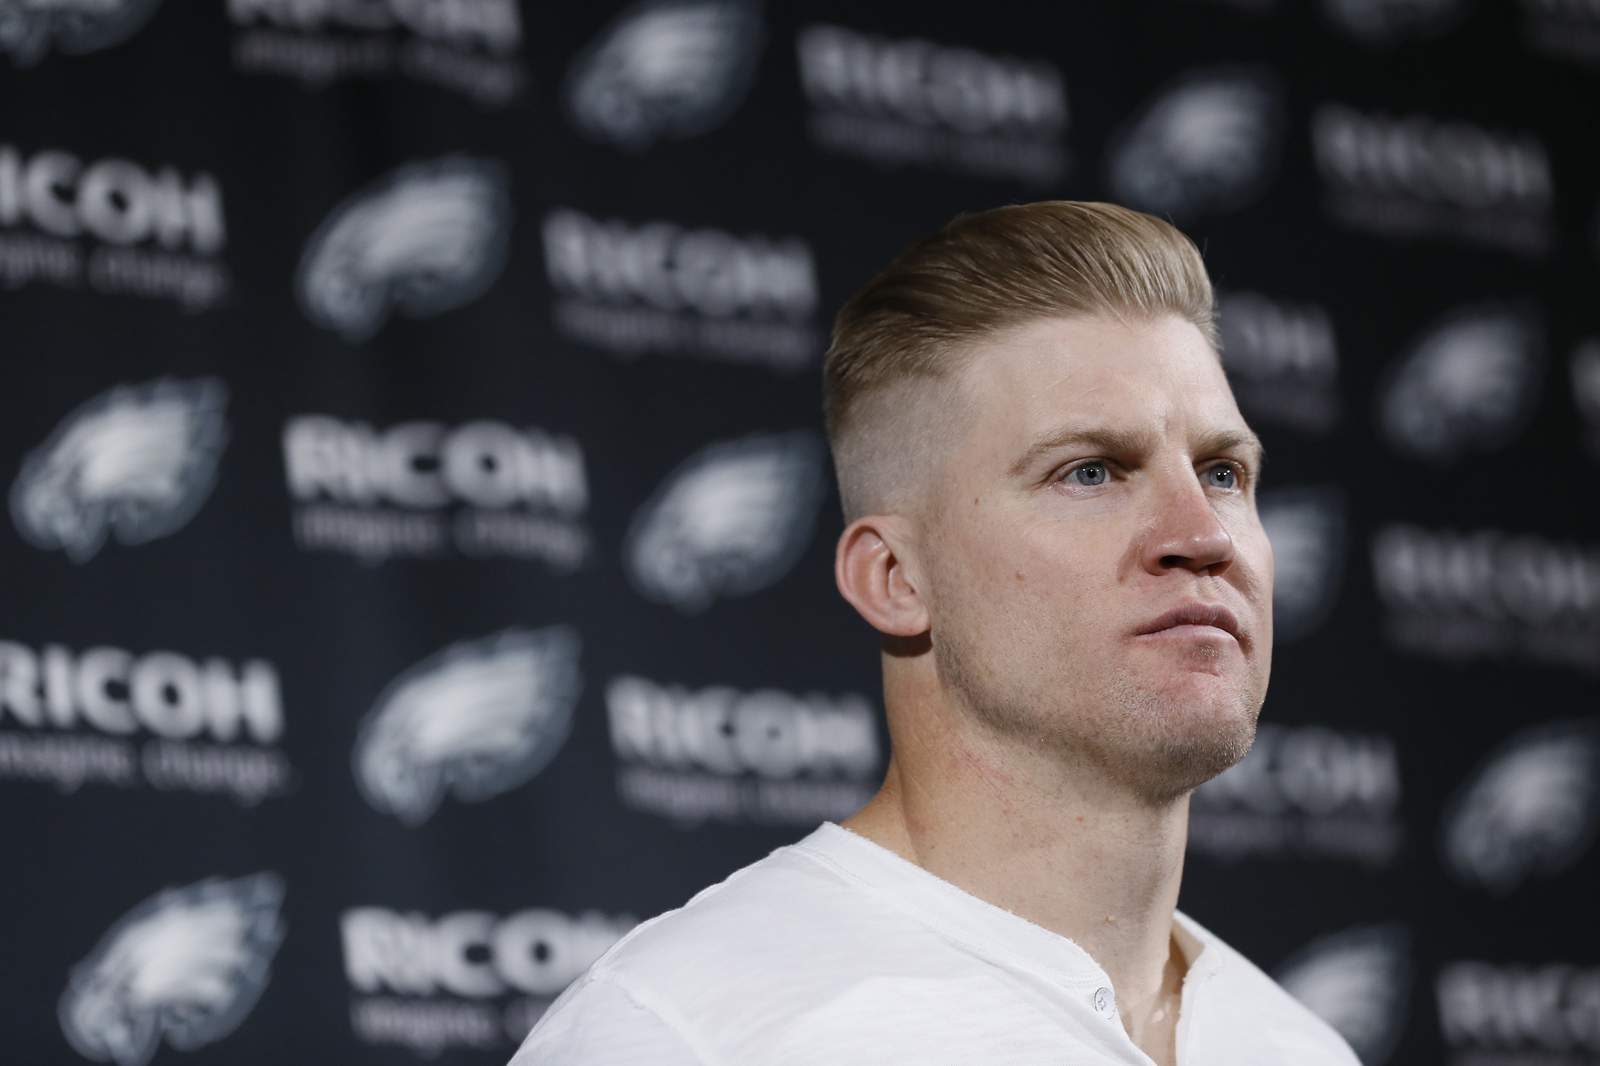 McCown with Texans 19 seasons after hoping to join team